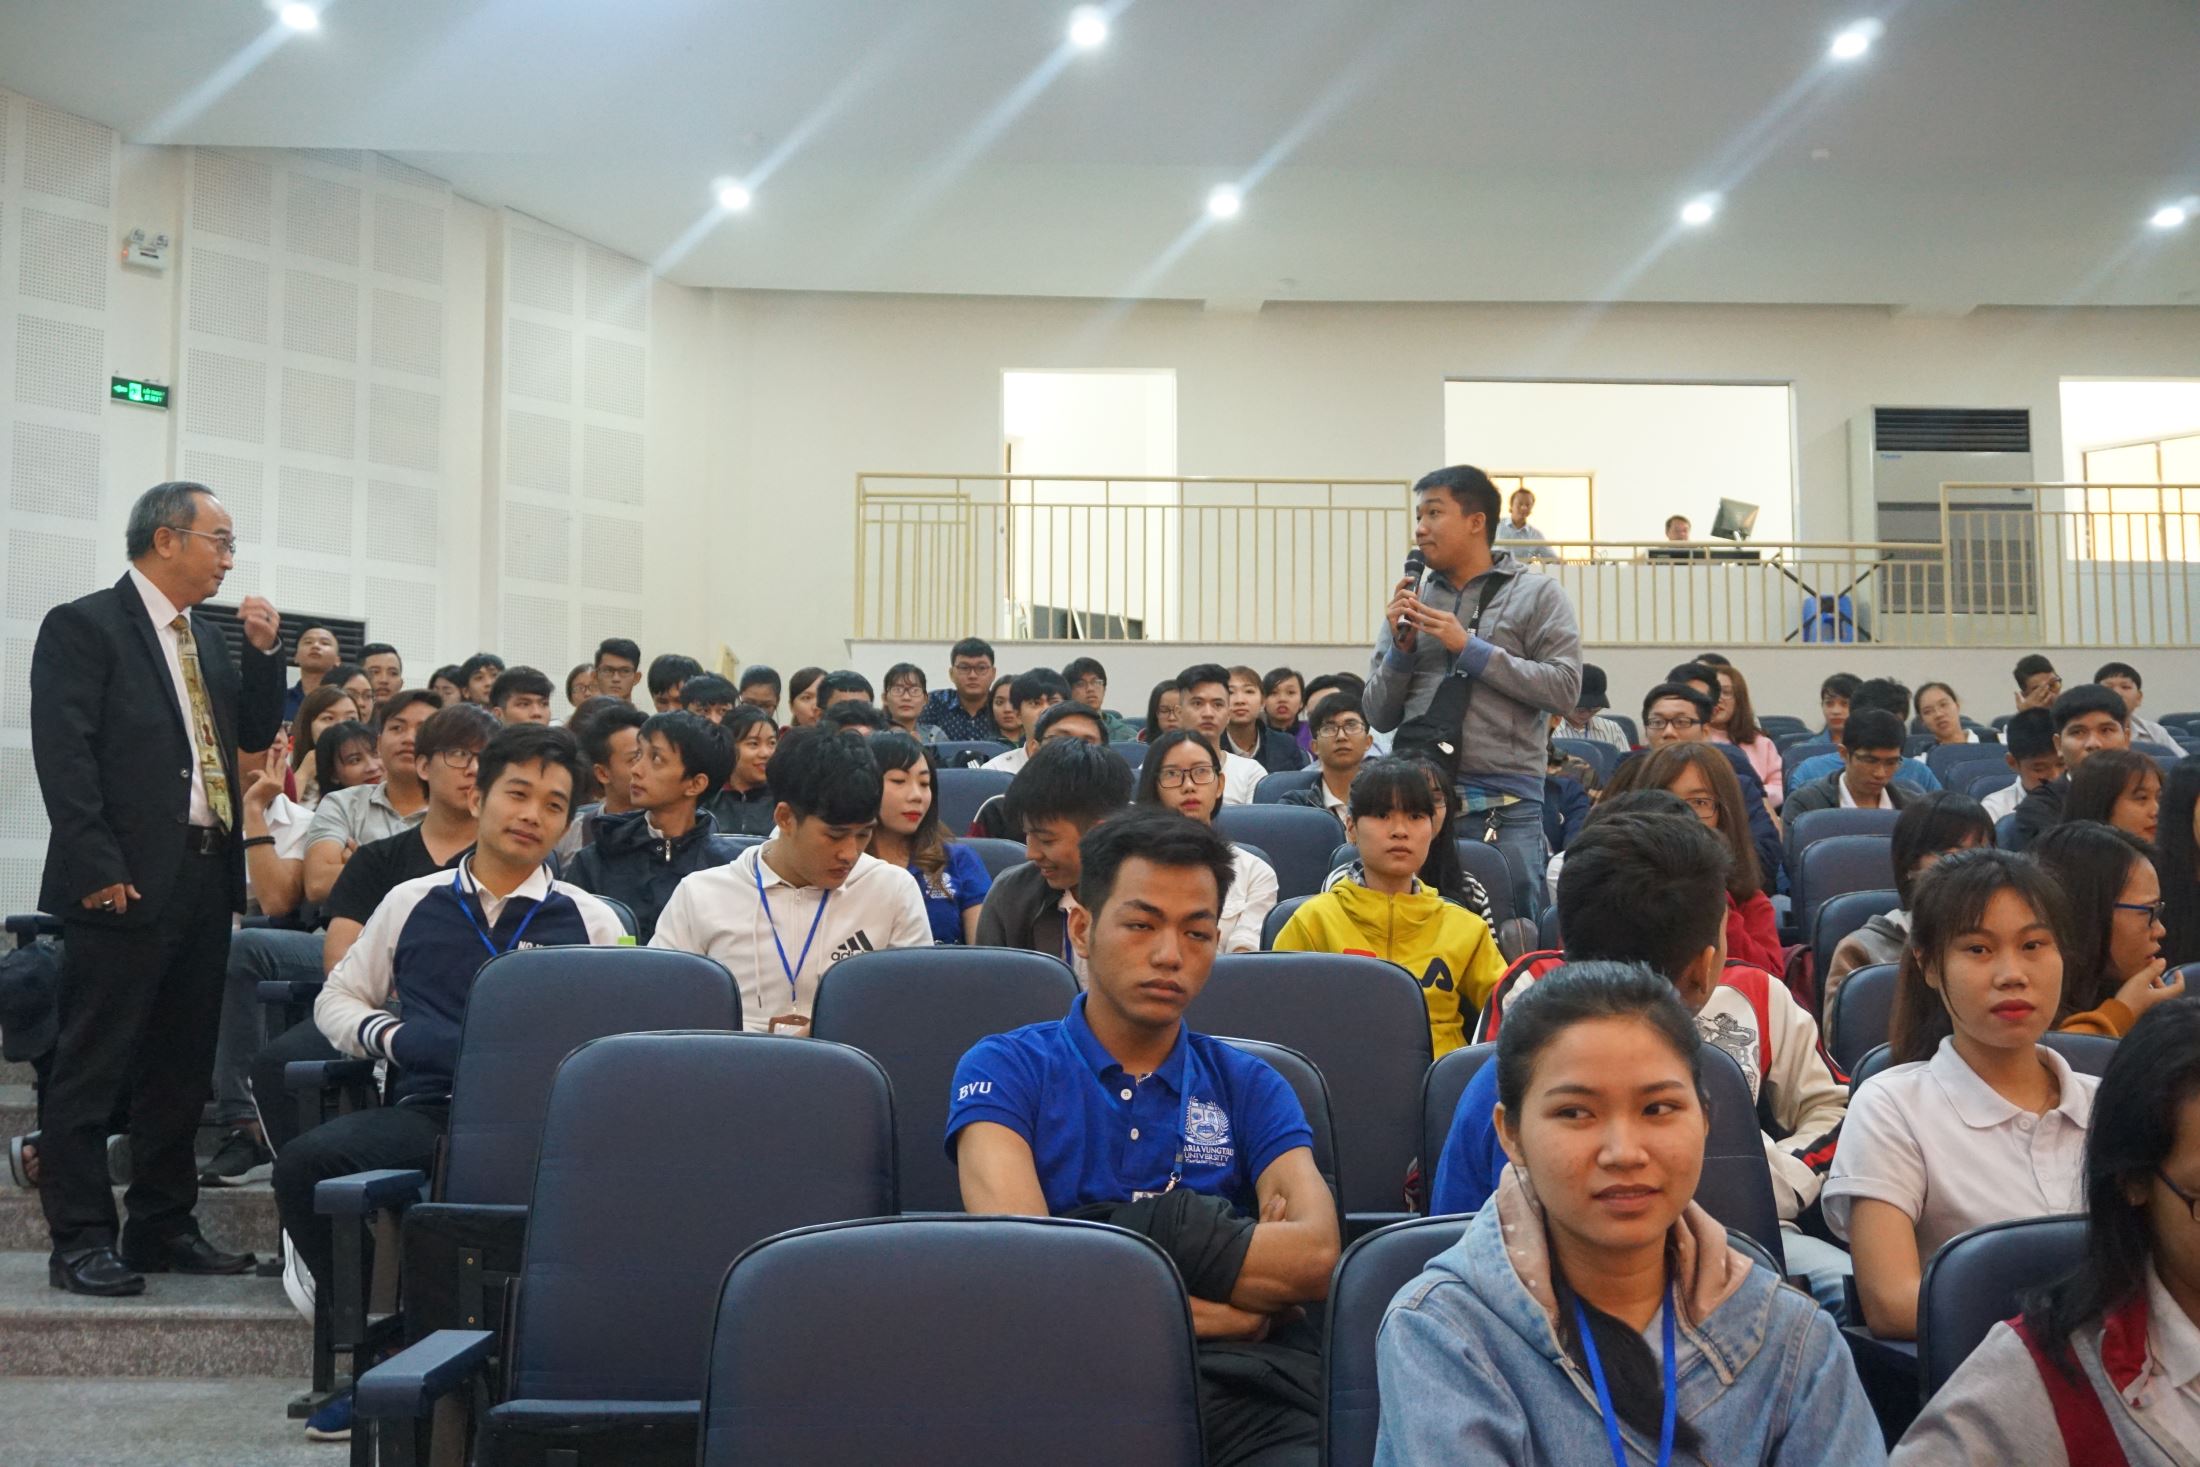 "Drive, do not hitch; identify strengths and focus on them; look for a job, not ask for a job; work smarter and faster, not harder; and above all, be a lifelong learner.", Dr. Duy An conveyed to BVU students